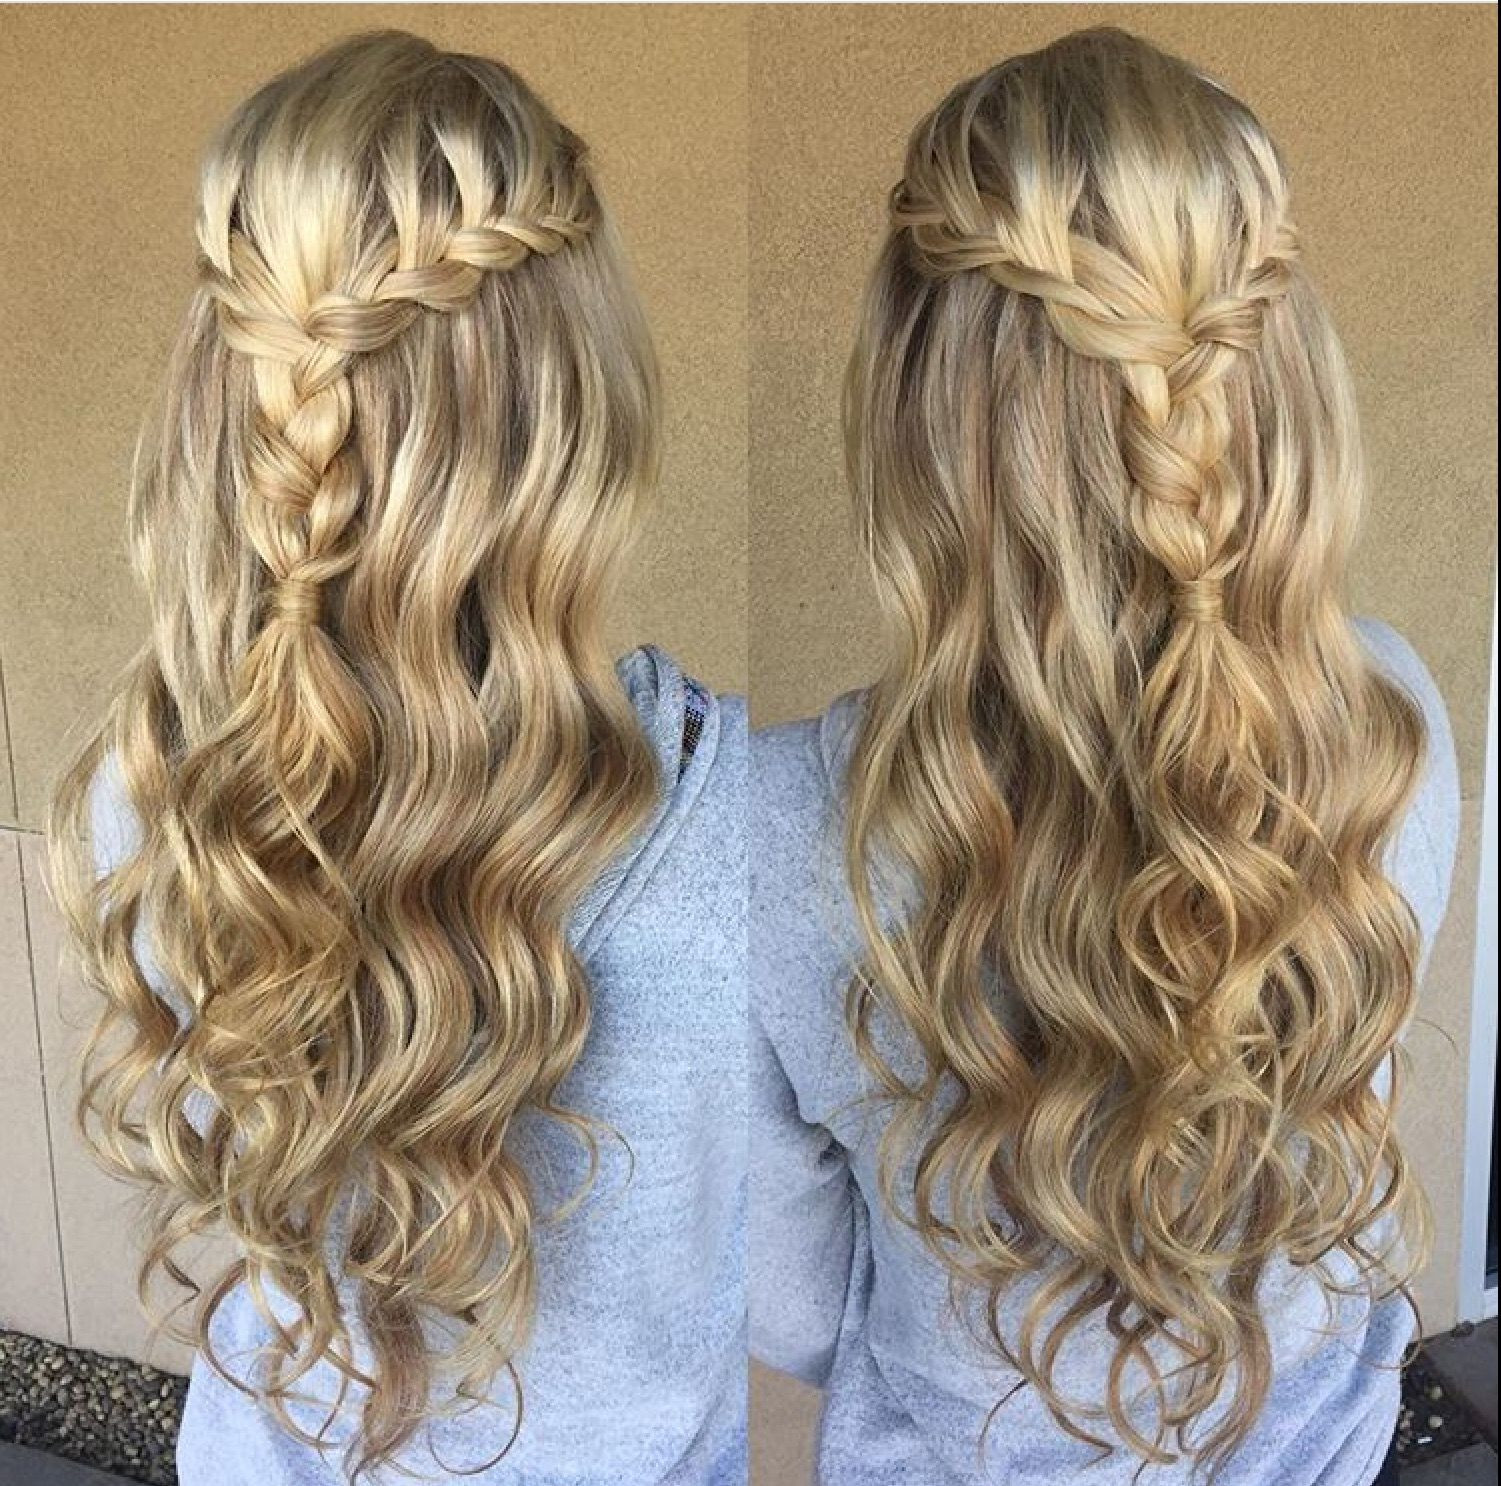 Prom Hairstyle Half Updo
 19 In parable La s Hairstyles Blonde Ideas